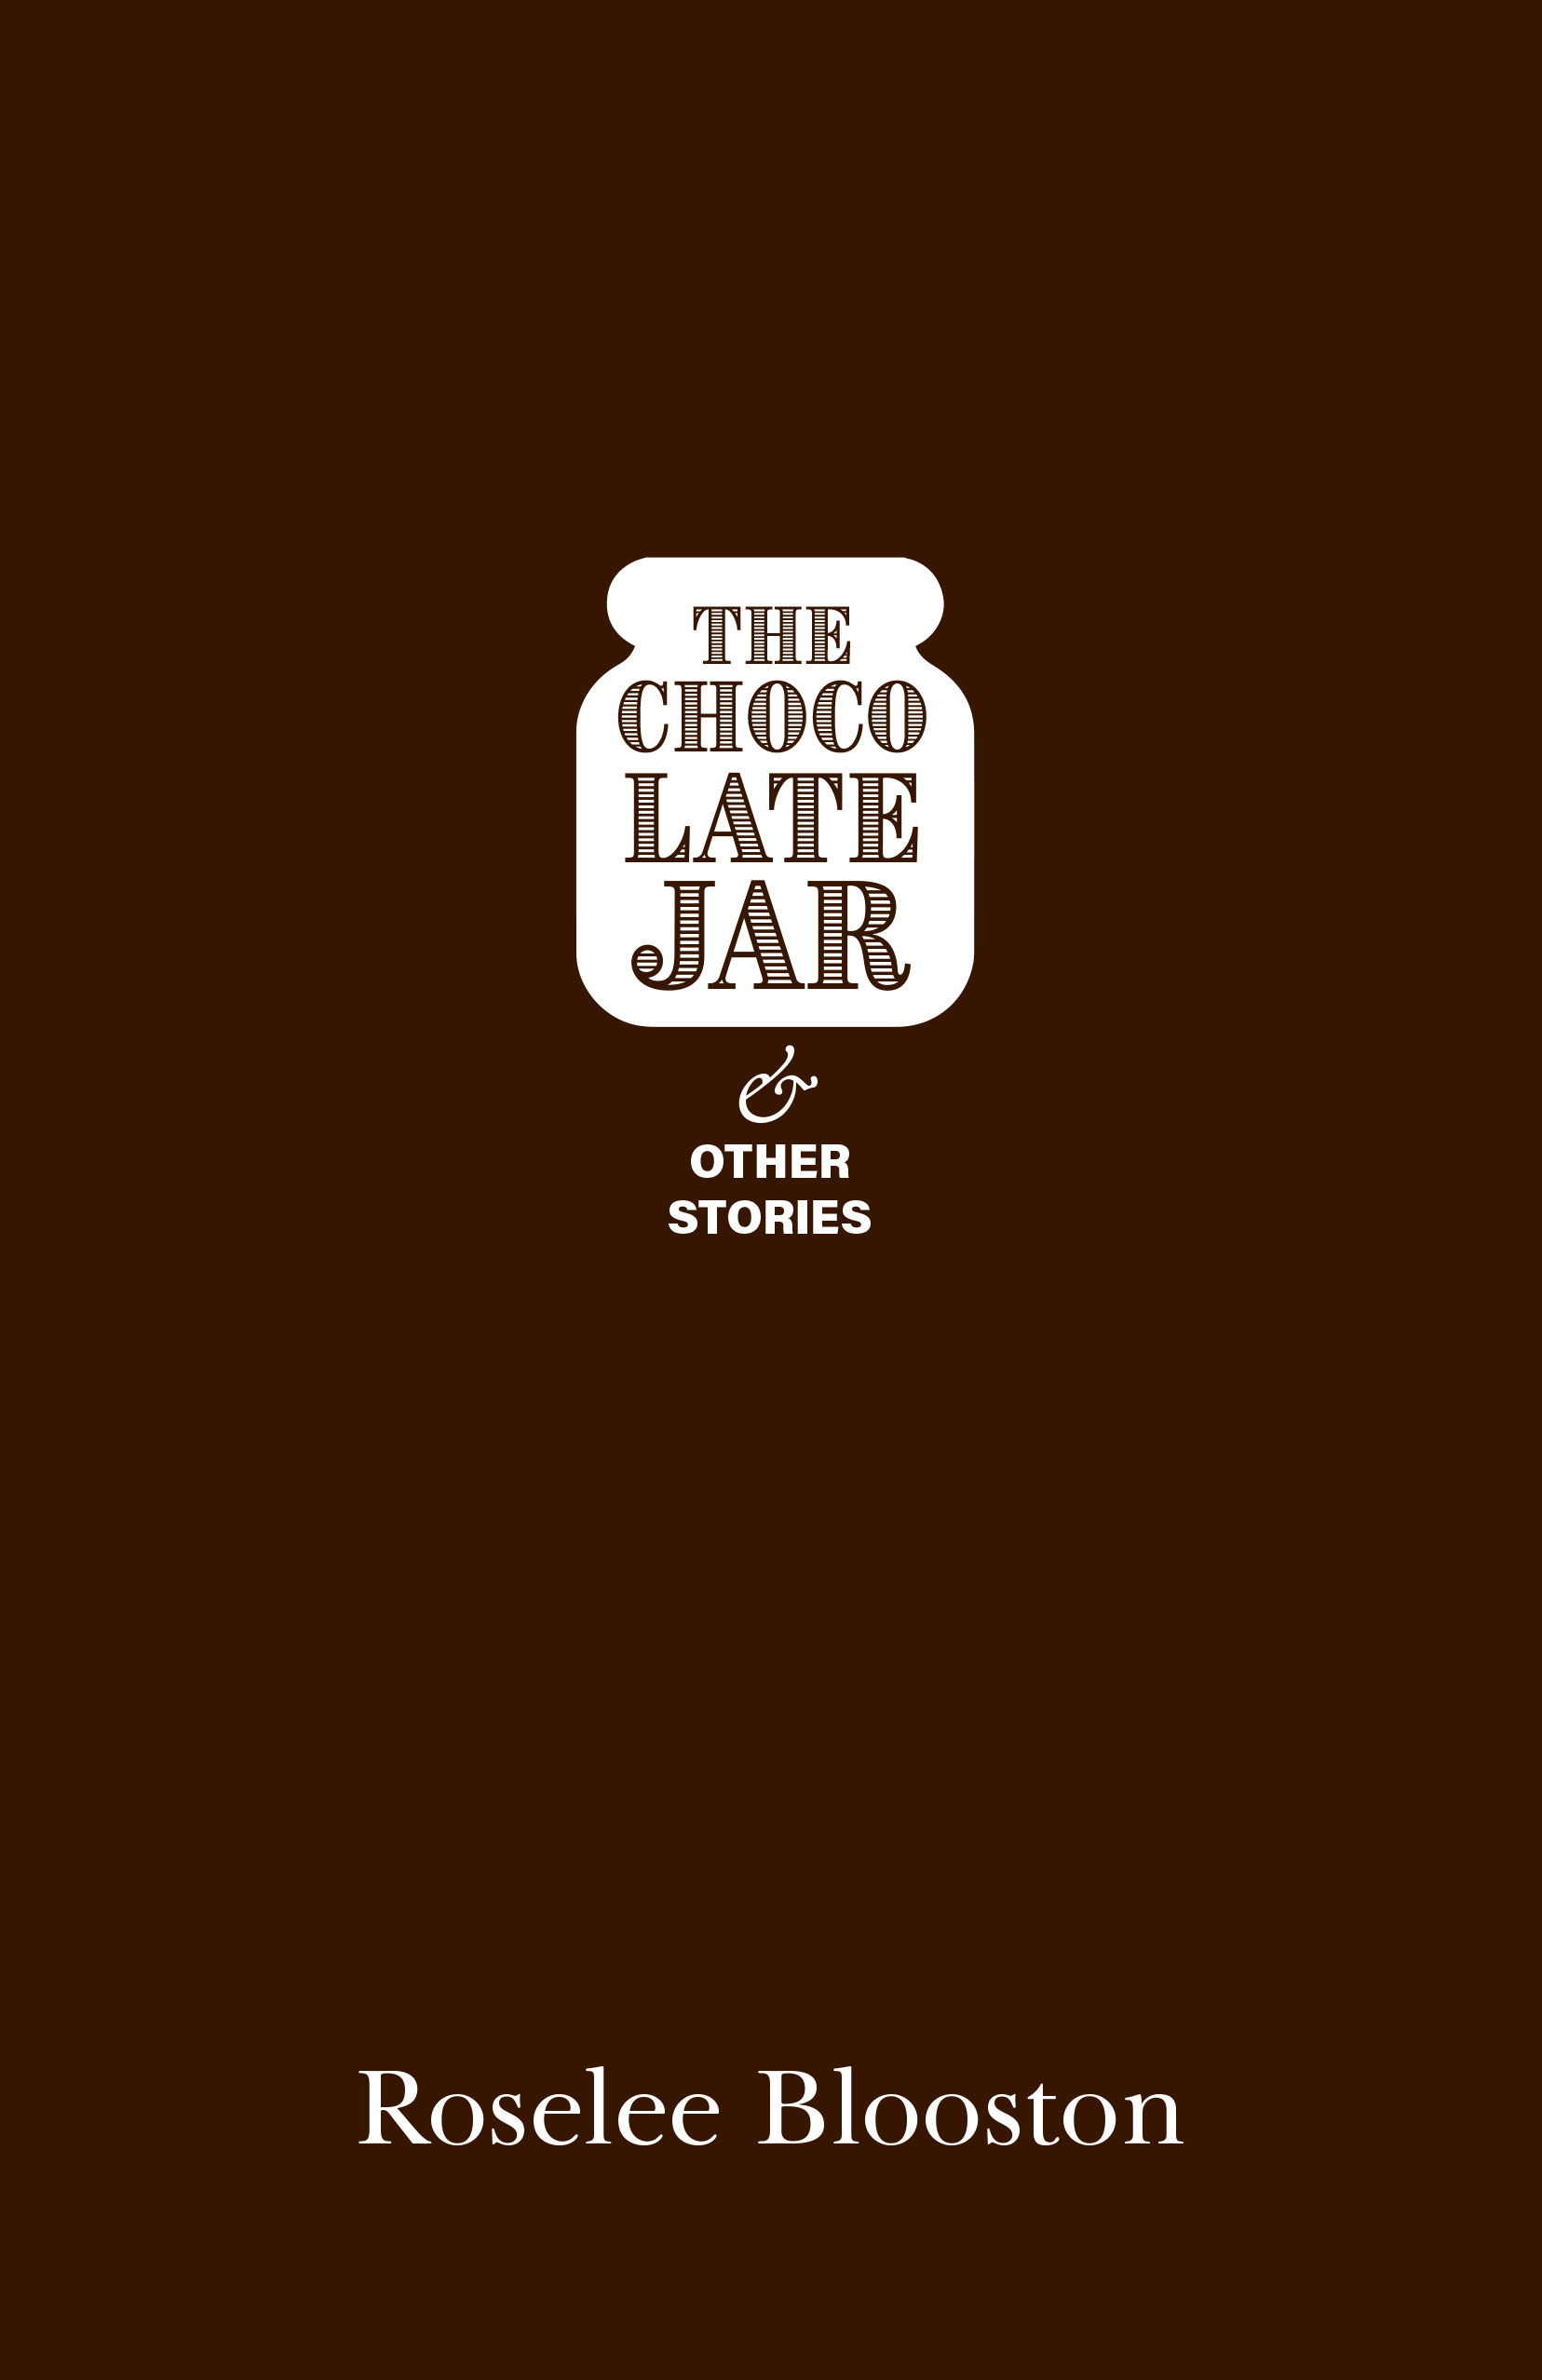 The Chocolate Jar & Other Stories is an Exploration of the Everyday and the Extraordinary